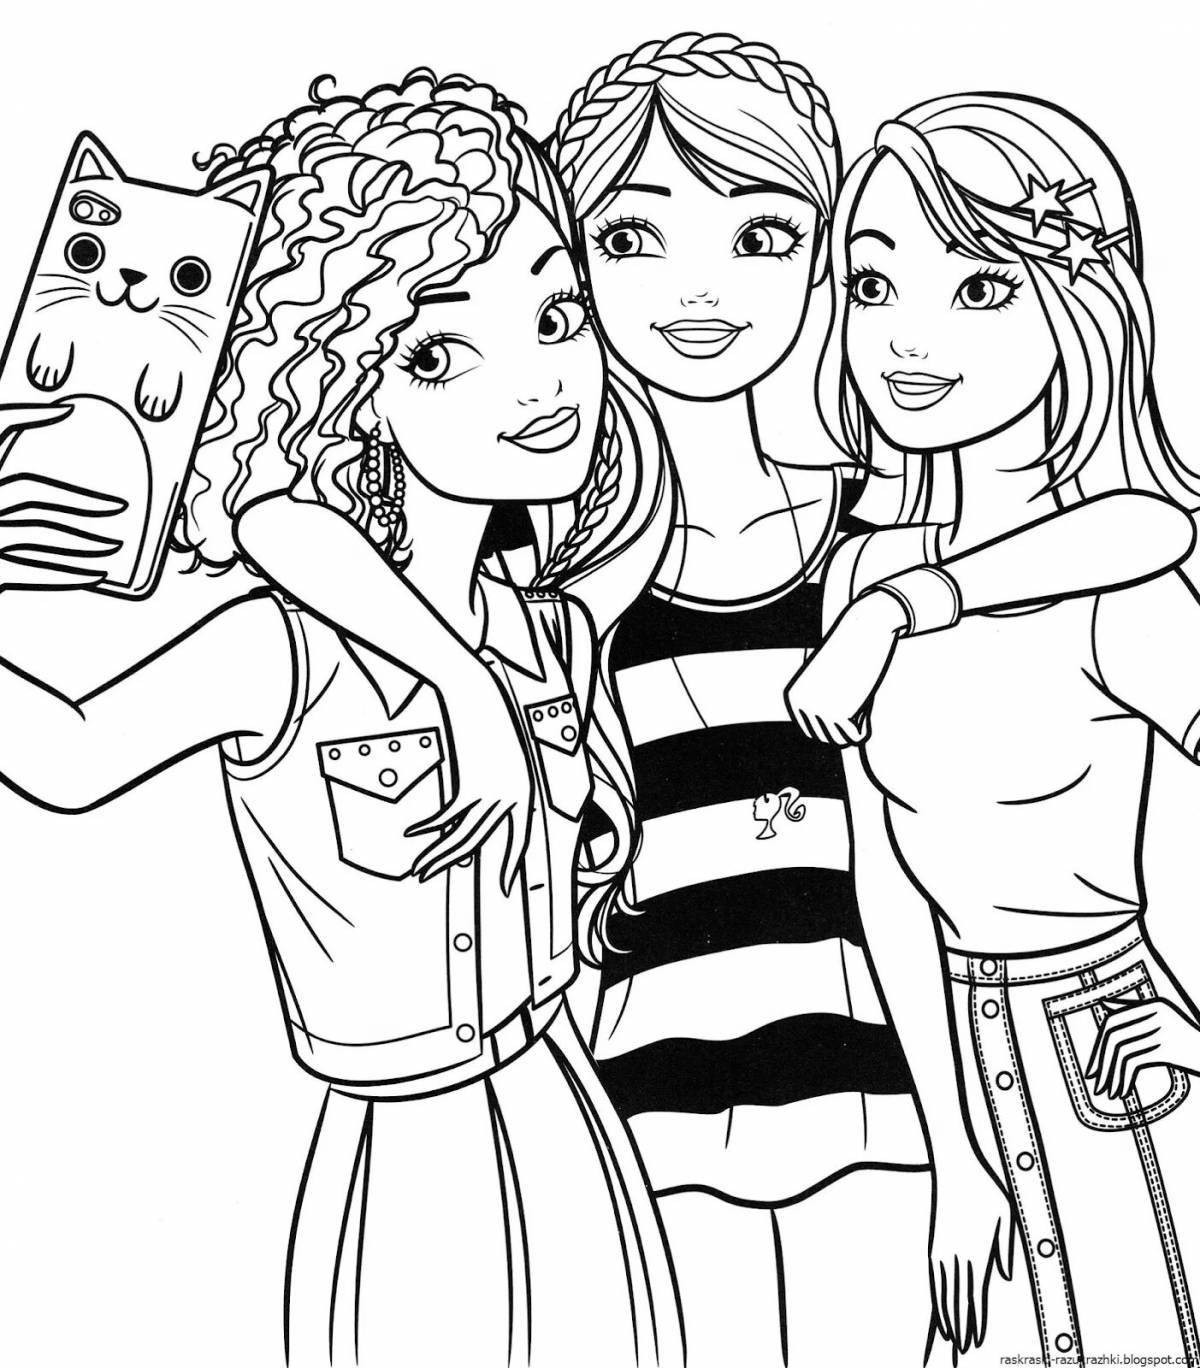 Unique coloring book for girls